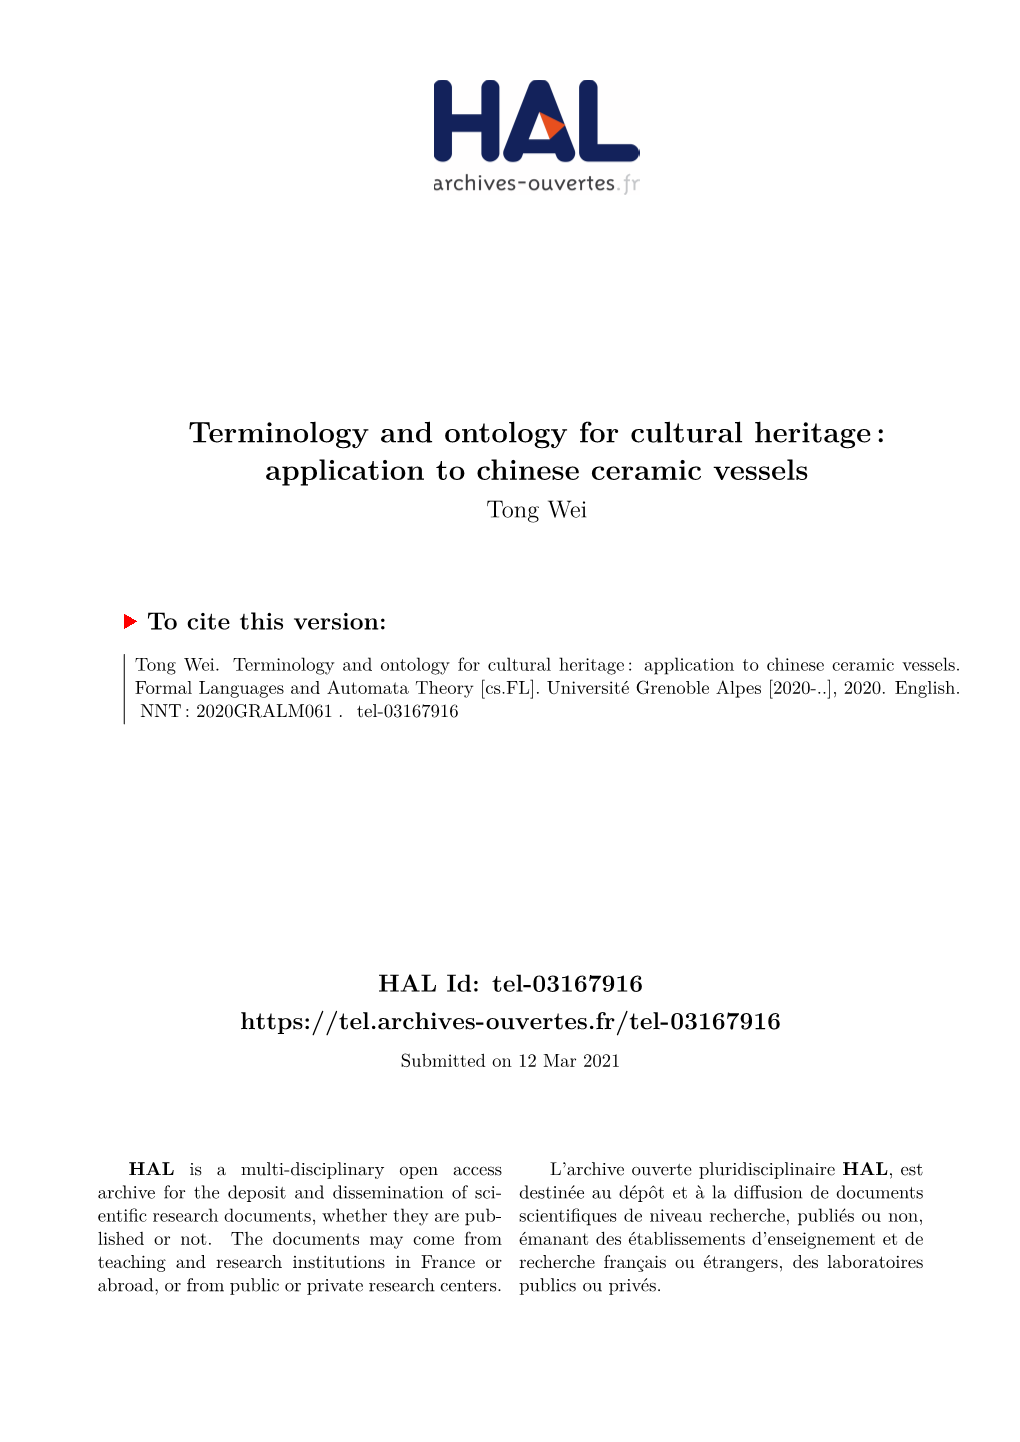 Terminology and Ontology for Cultural Heritage: Application to Chinese Ceramic Vessels